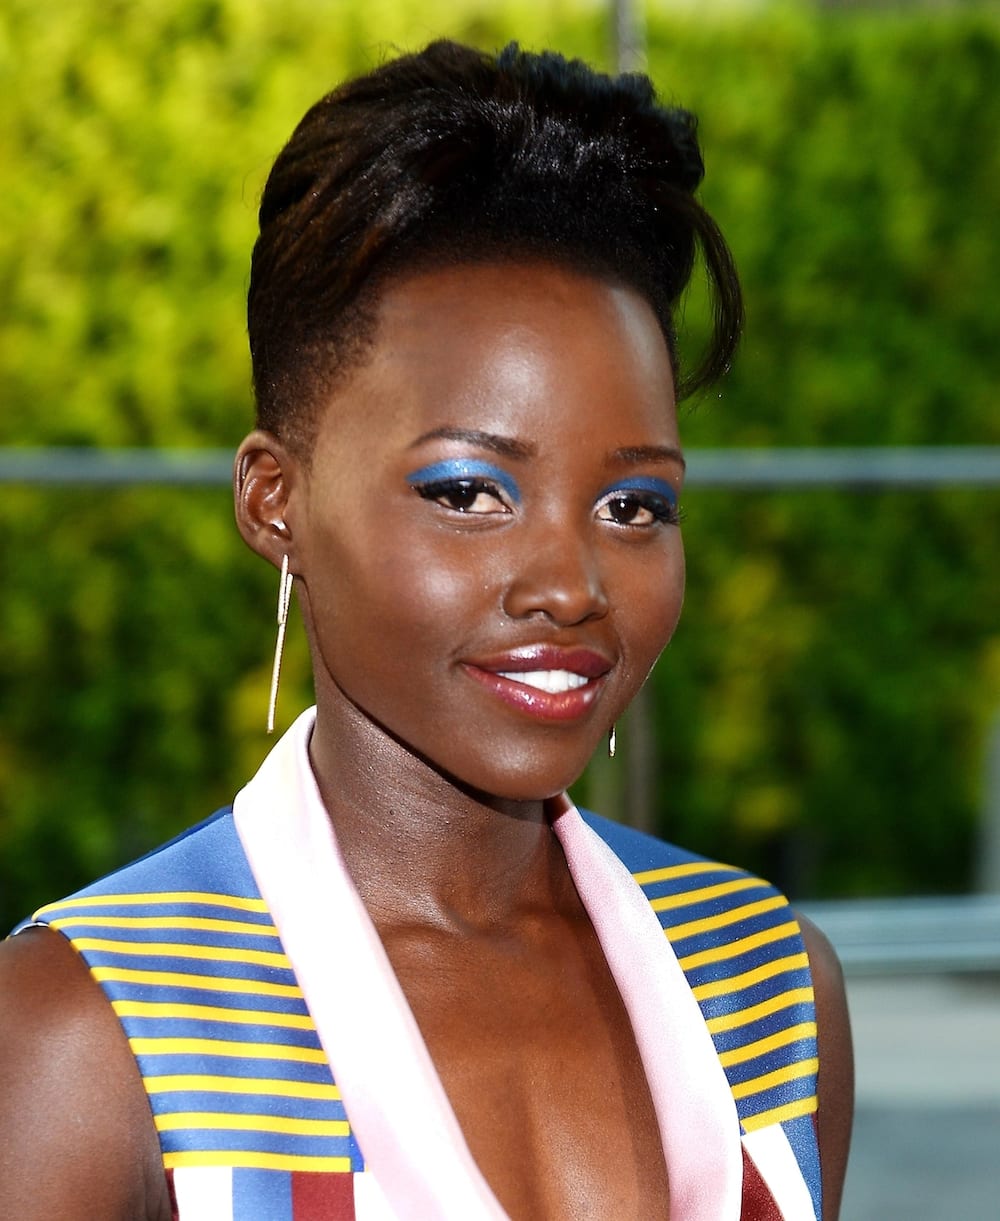 Lupita Nyong’o steals the show at the Oscars with stunning feather costume